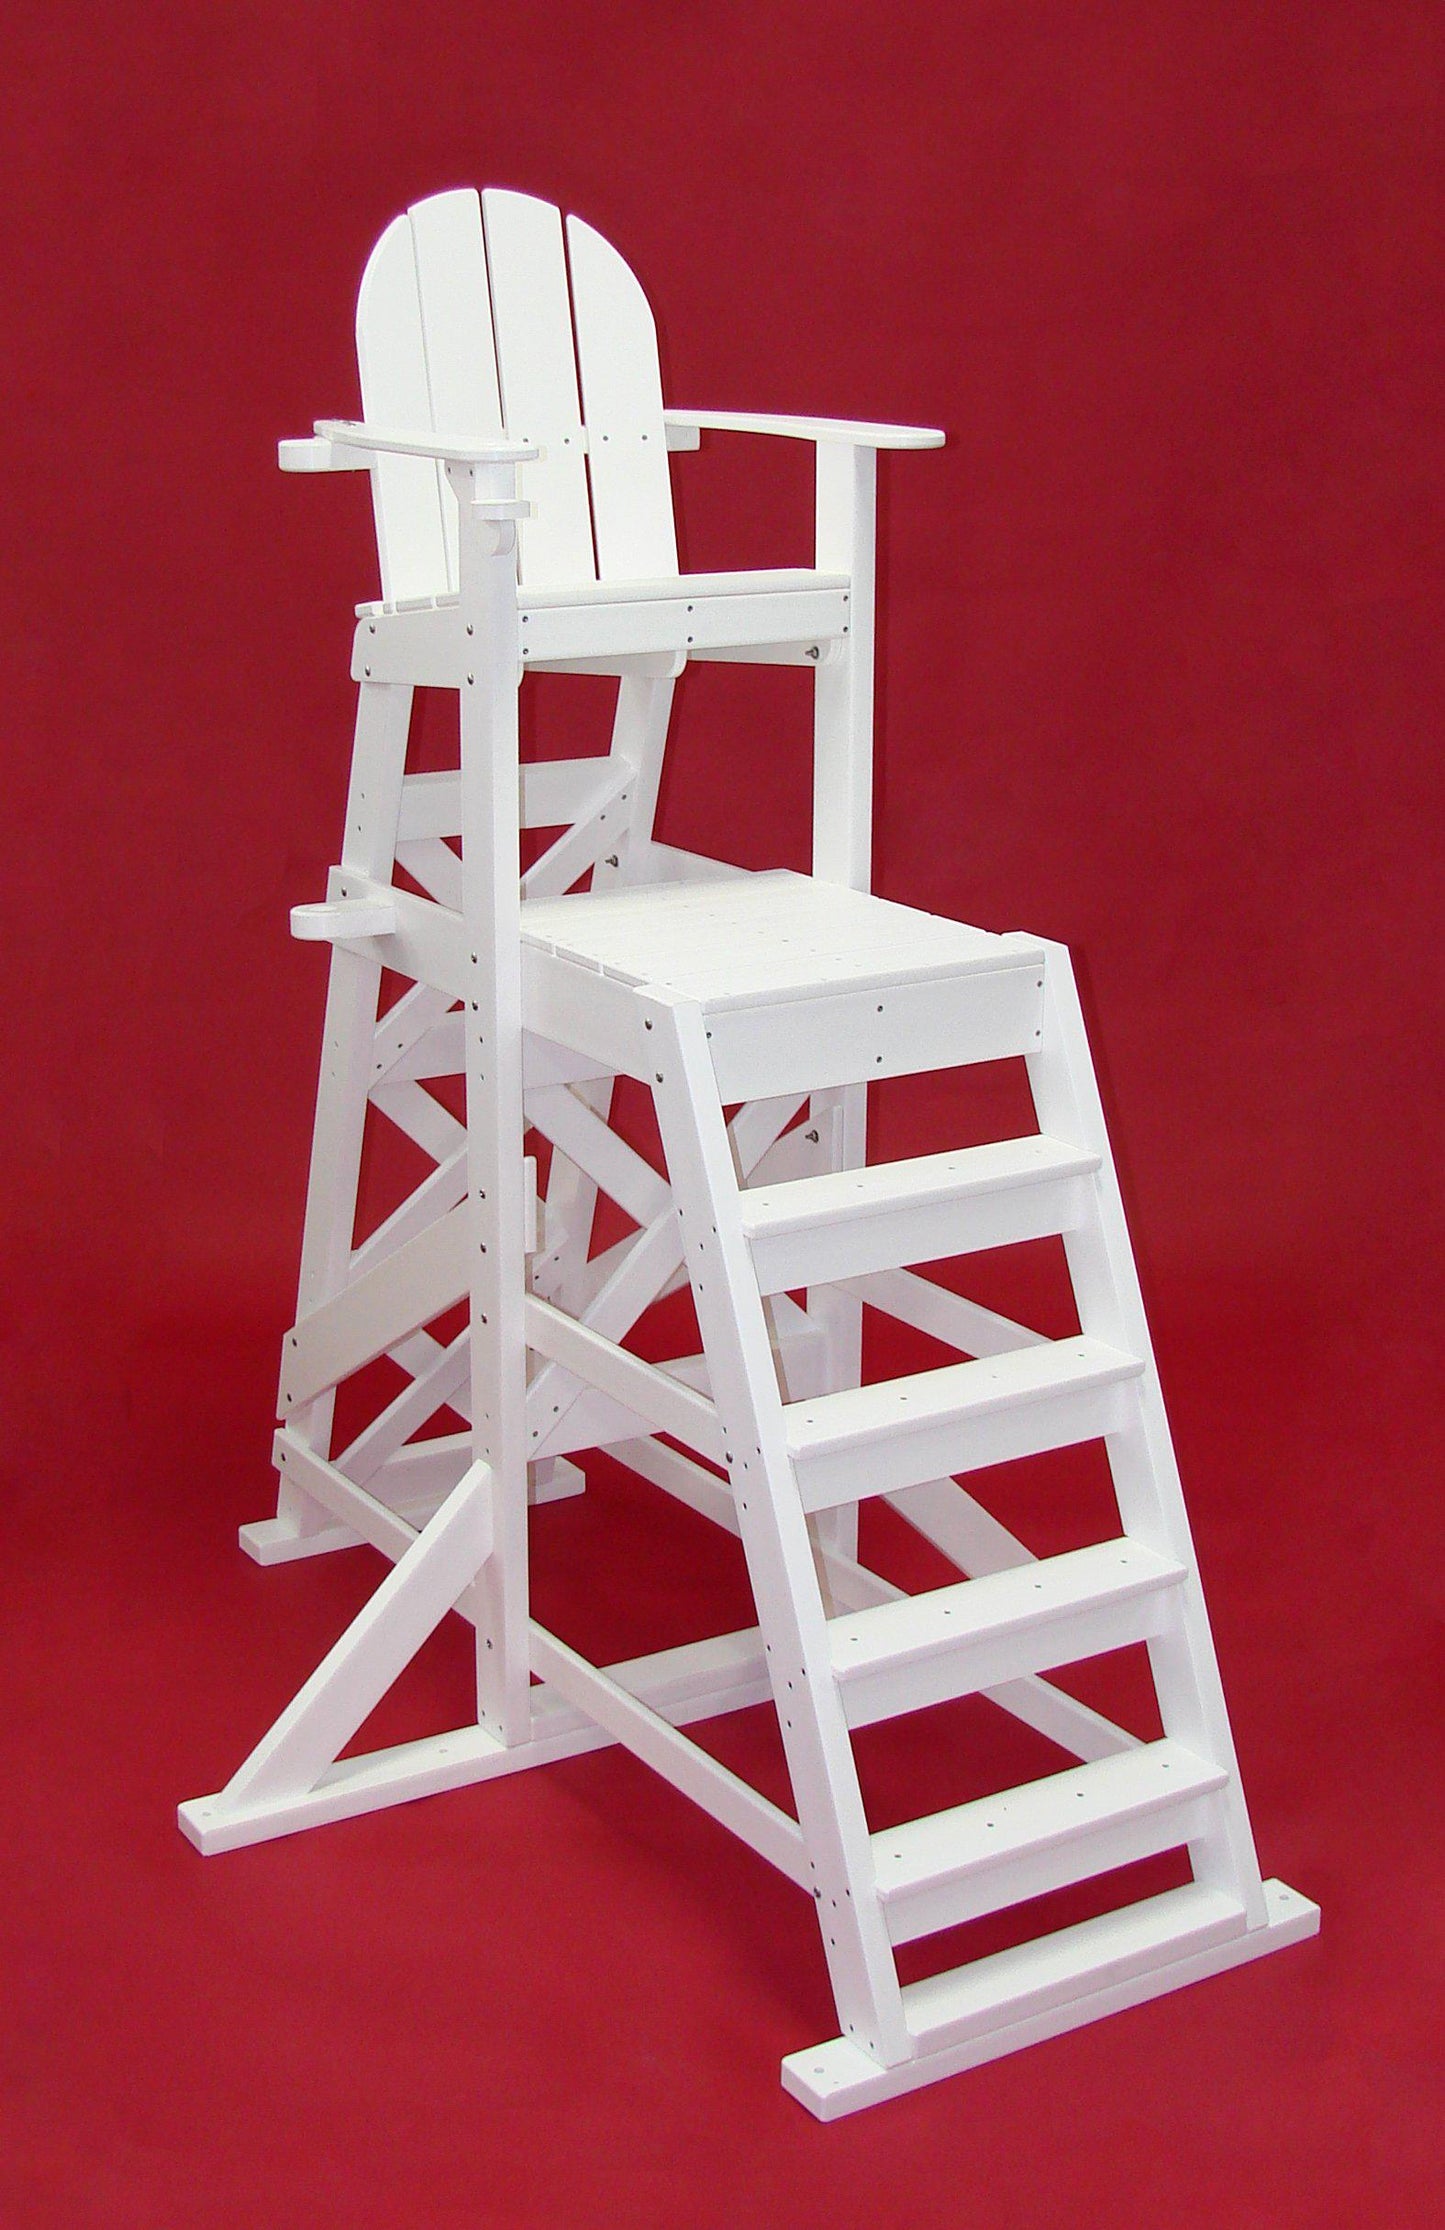 Tailwind Furniture Recycled Plastic TLG-535 Tall Lifeguard Chair - With Front Ladder - Seat Height: 64" - LEAD TIME TO SHIP 20 BUSINESS DAYS